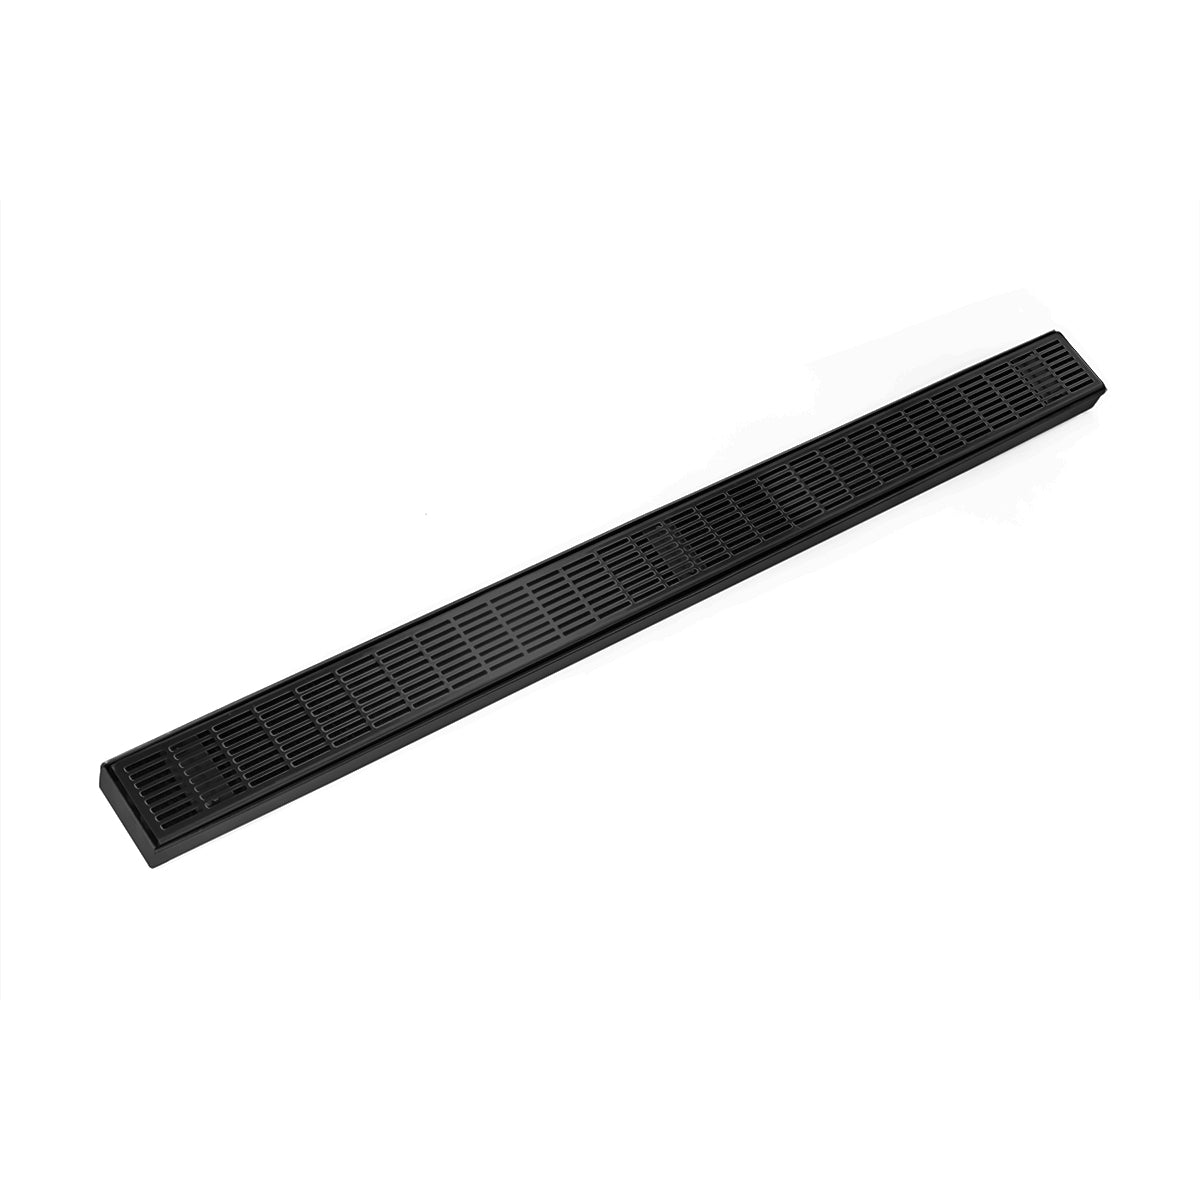 Infinity Drain 36" FX Series Fixed Length Linear Drain Kit with Perforated Slotted Grate